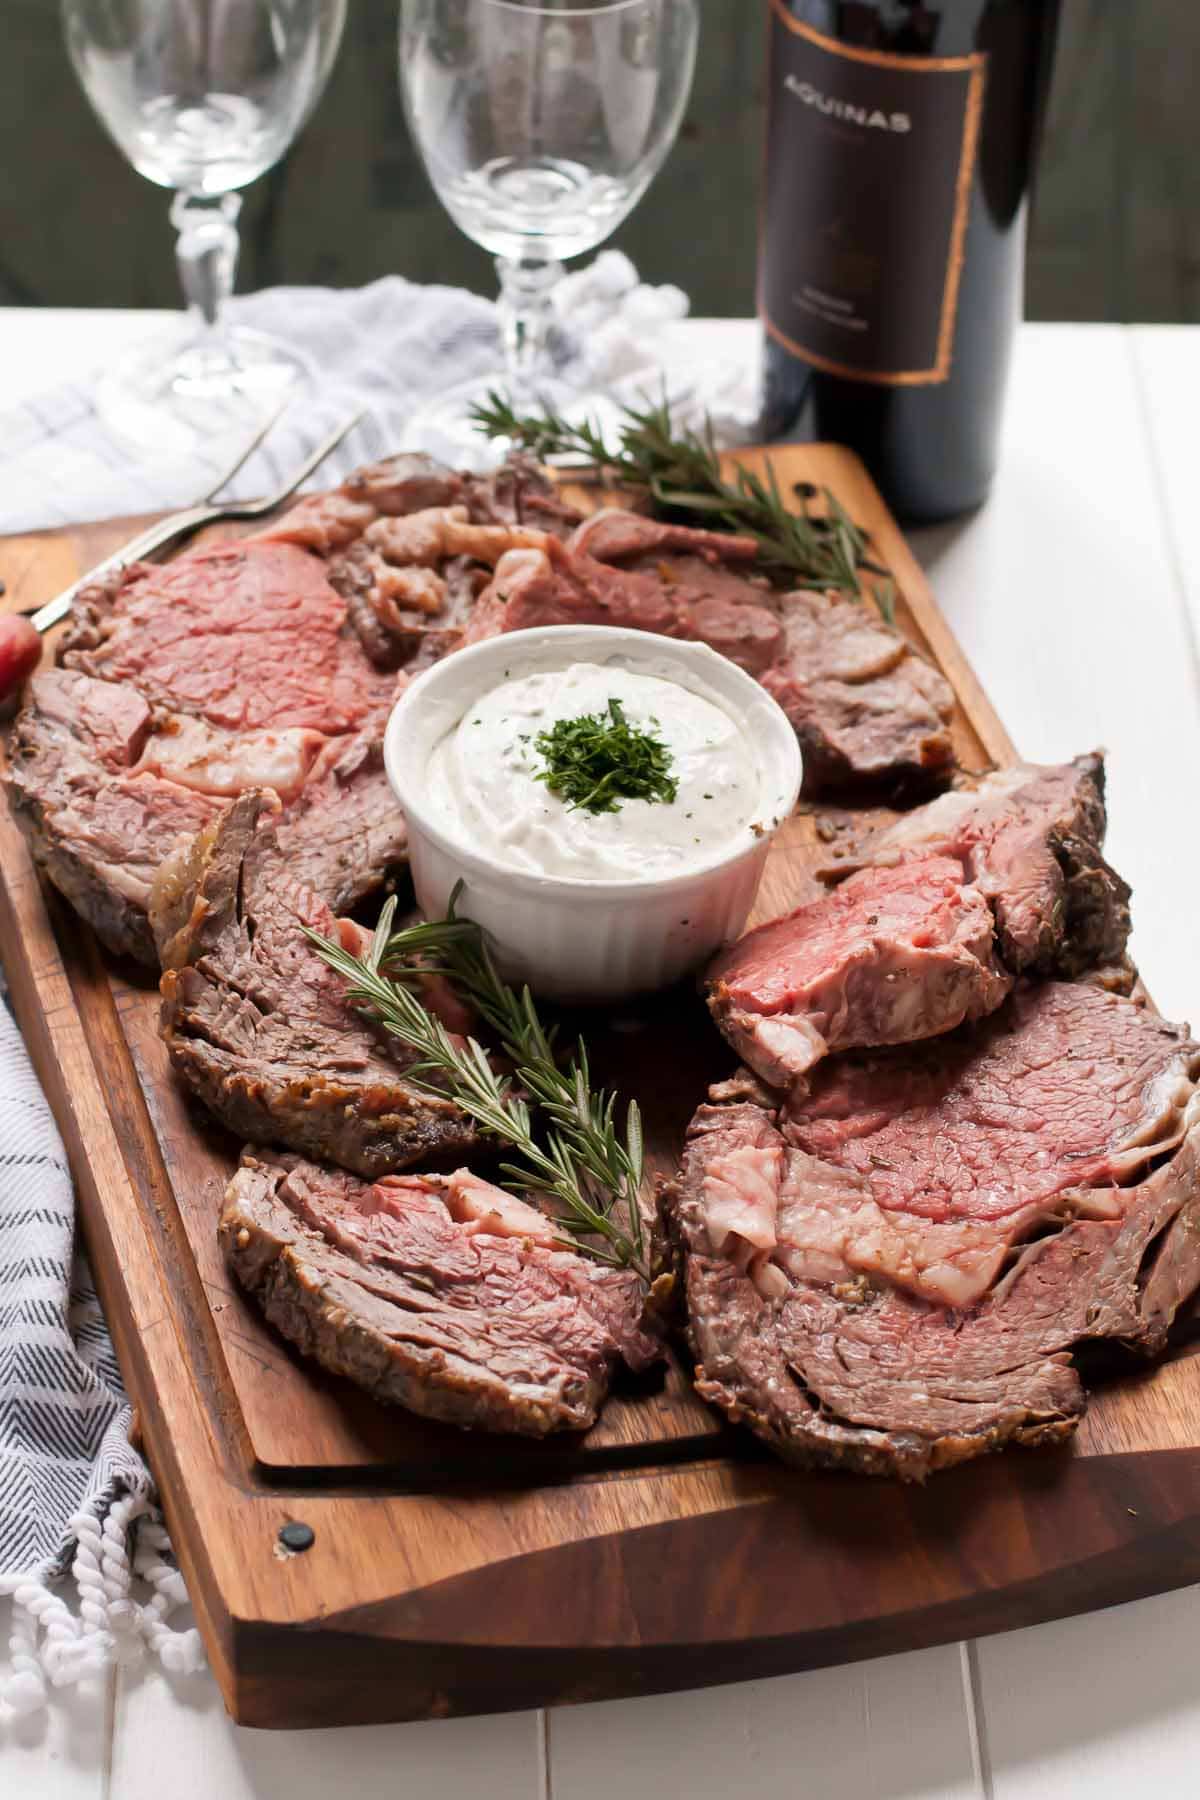 This Garlic and Rosemary Prime Rib Recipe is surprisingly easy to make and perfect for the holidays!